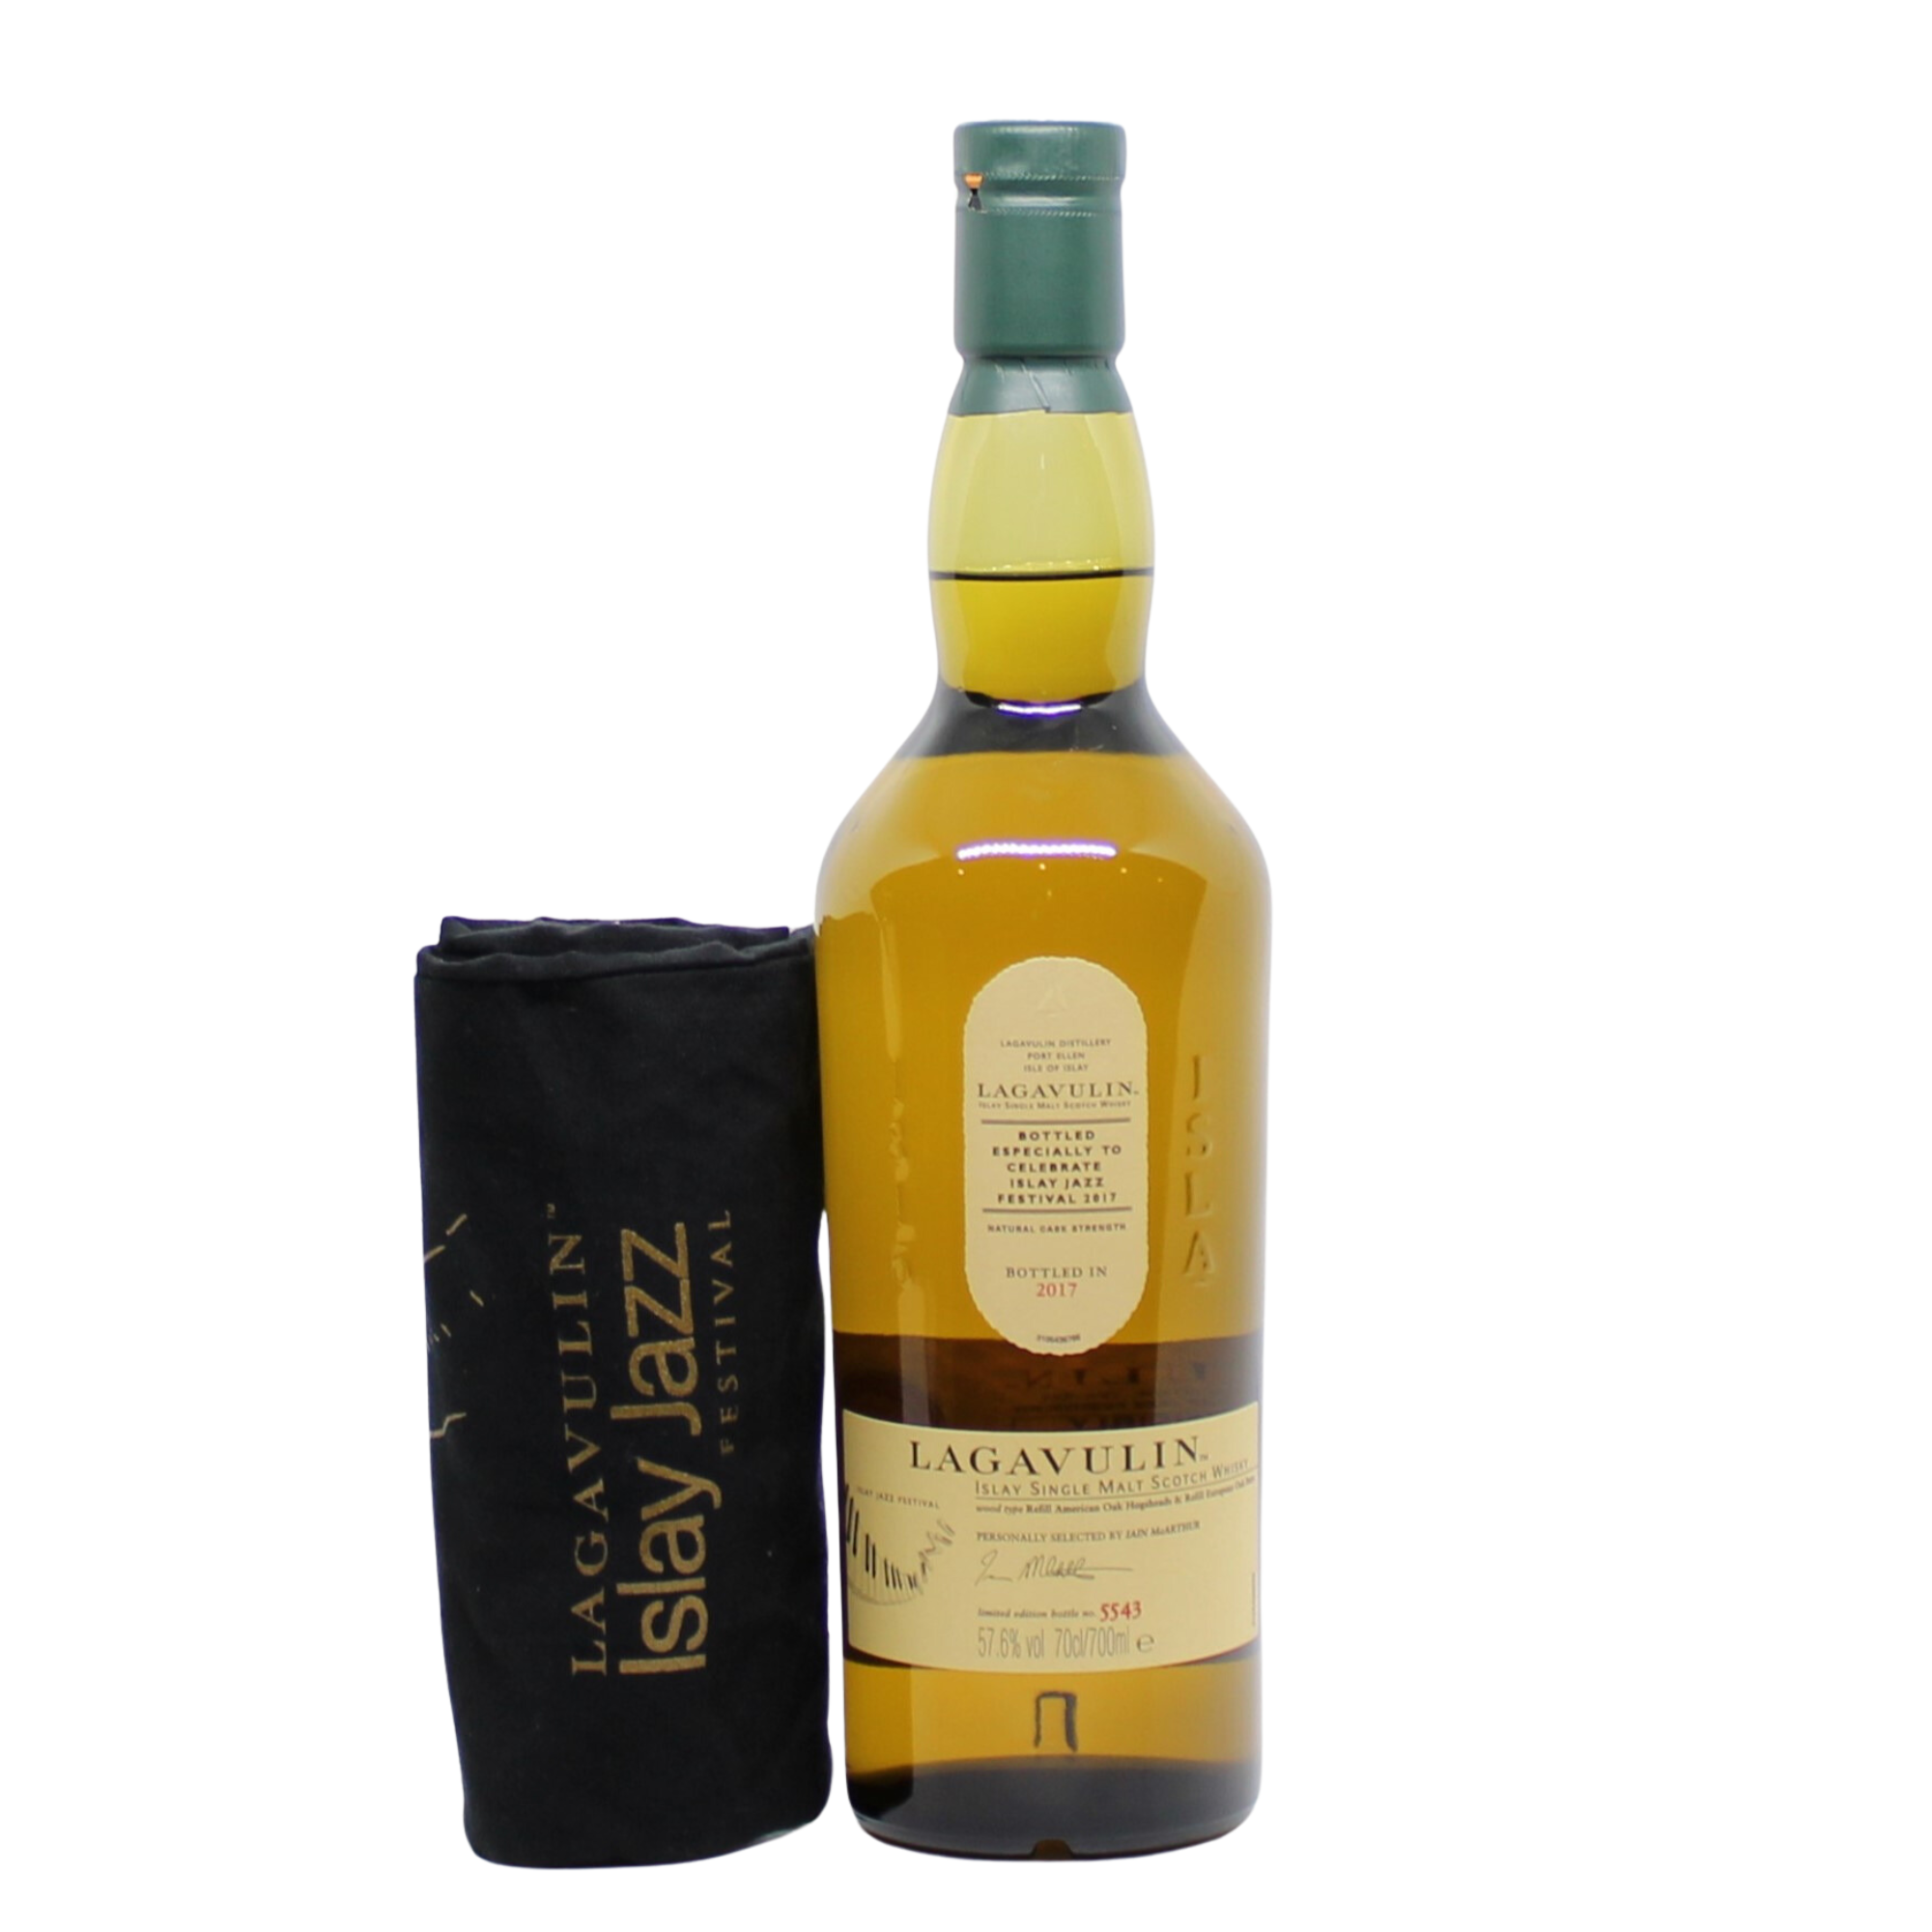 The Lagavulin Distillery has been a sponsor of the Islay Jazz festival since 2010 and celebrates the occasion annually by releasing a limited edition bottling. This limited edition of 6000 bottles was released in 2017 at a Natural Cask Strength ABV of 57.6% and was matured in a combination of Refill American Oak Hogsheads and Refill European Butts